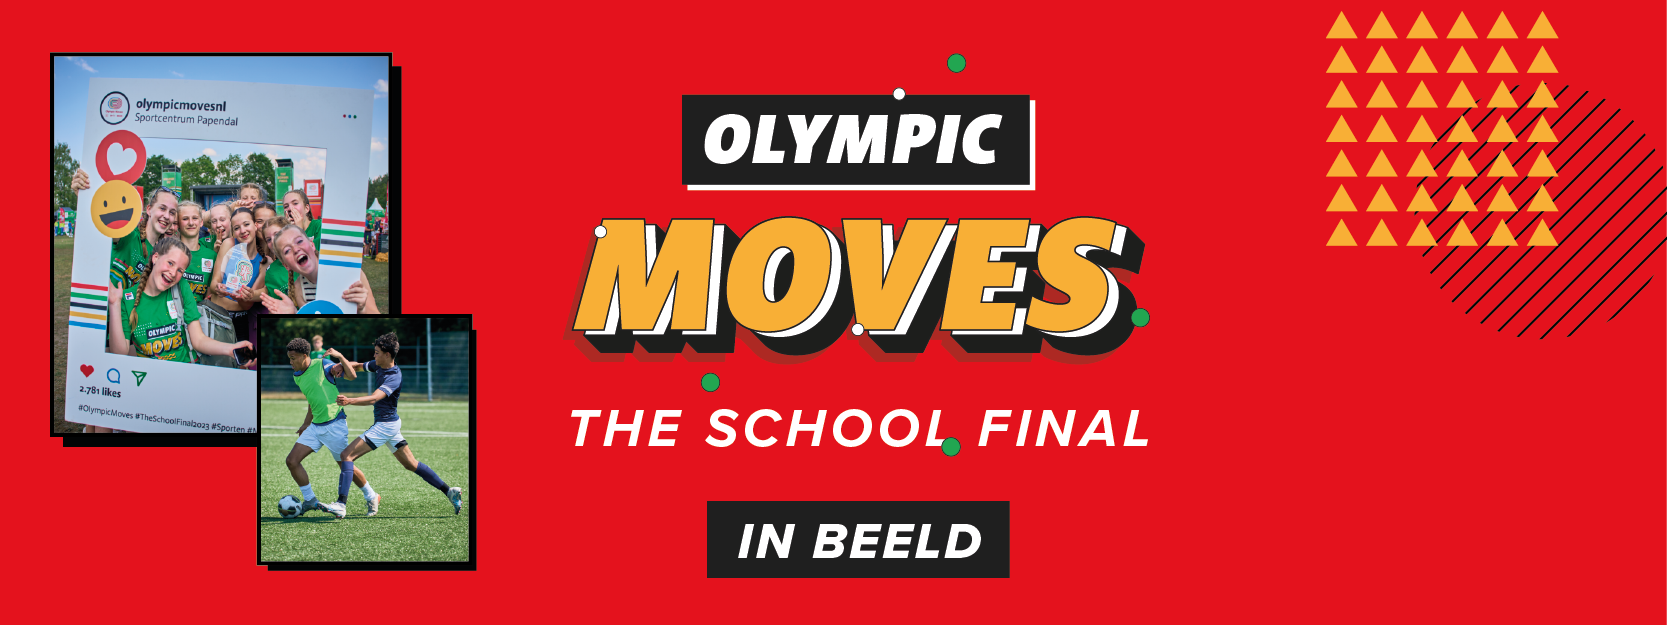 20190910 Olympic Moves Pitch Full 04-31.png